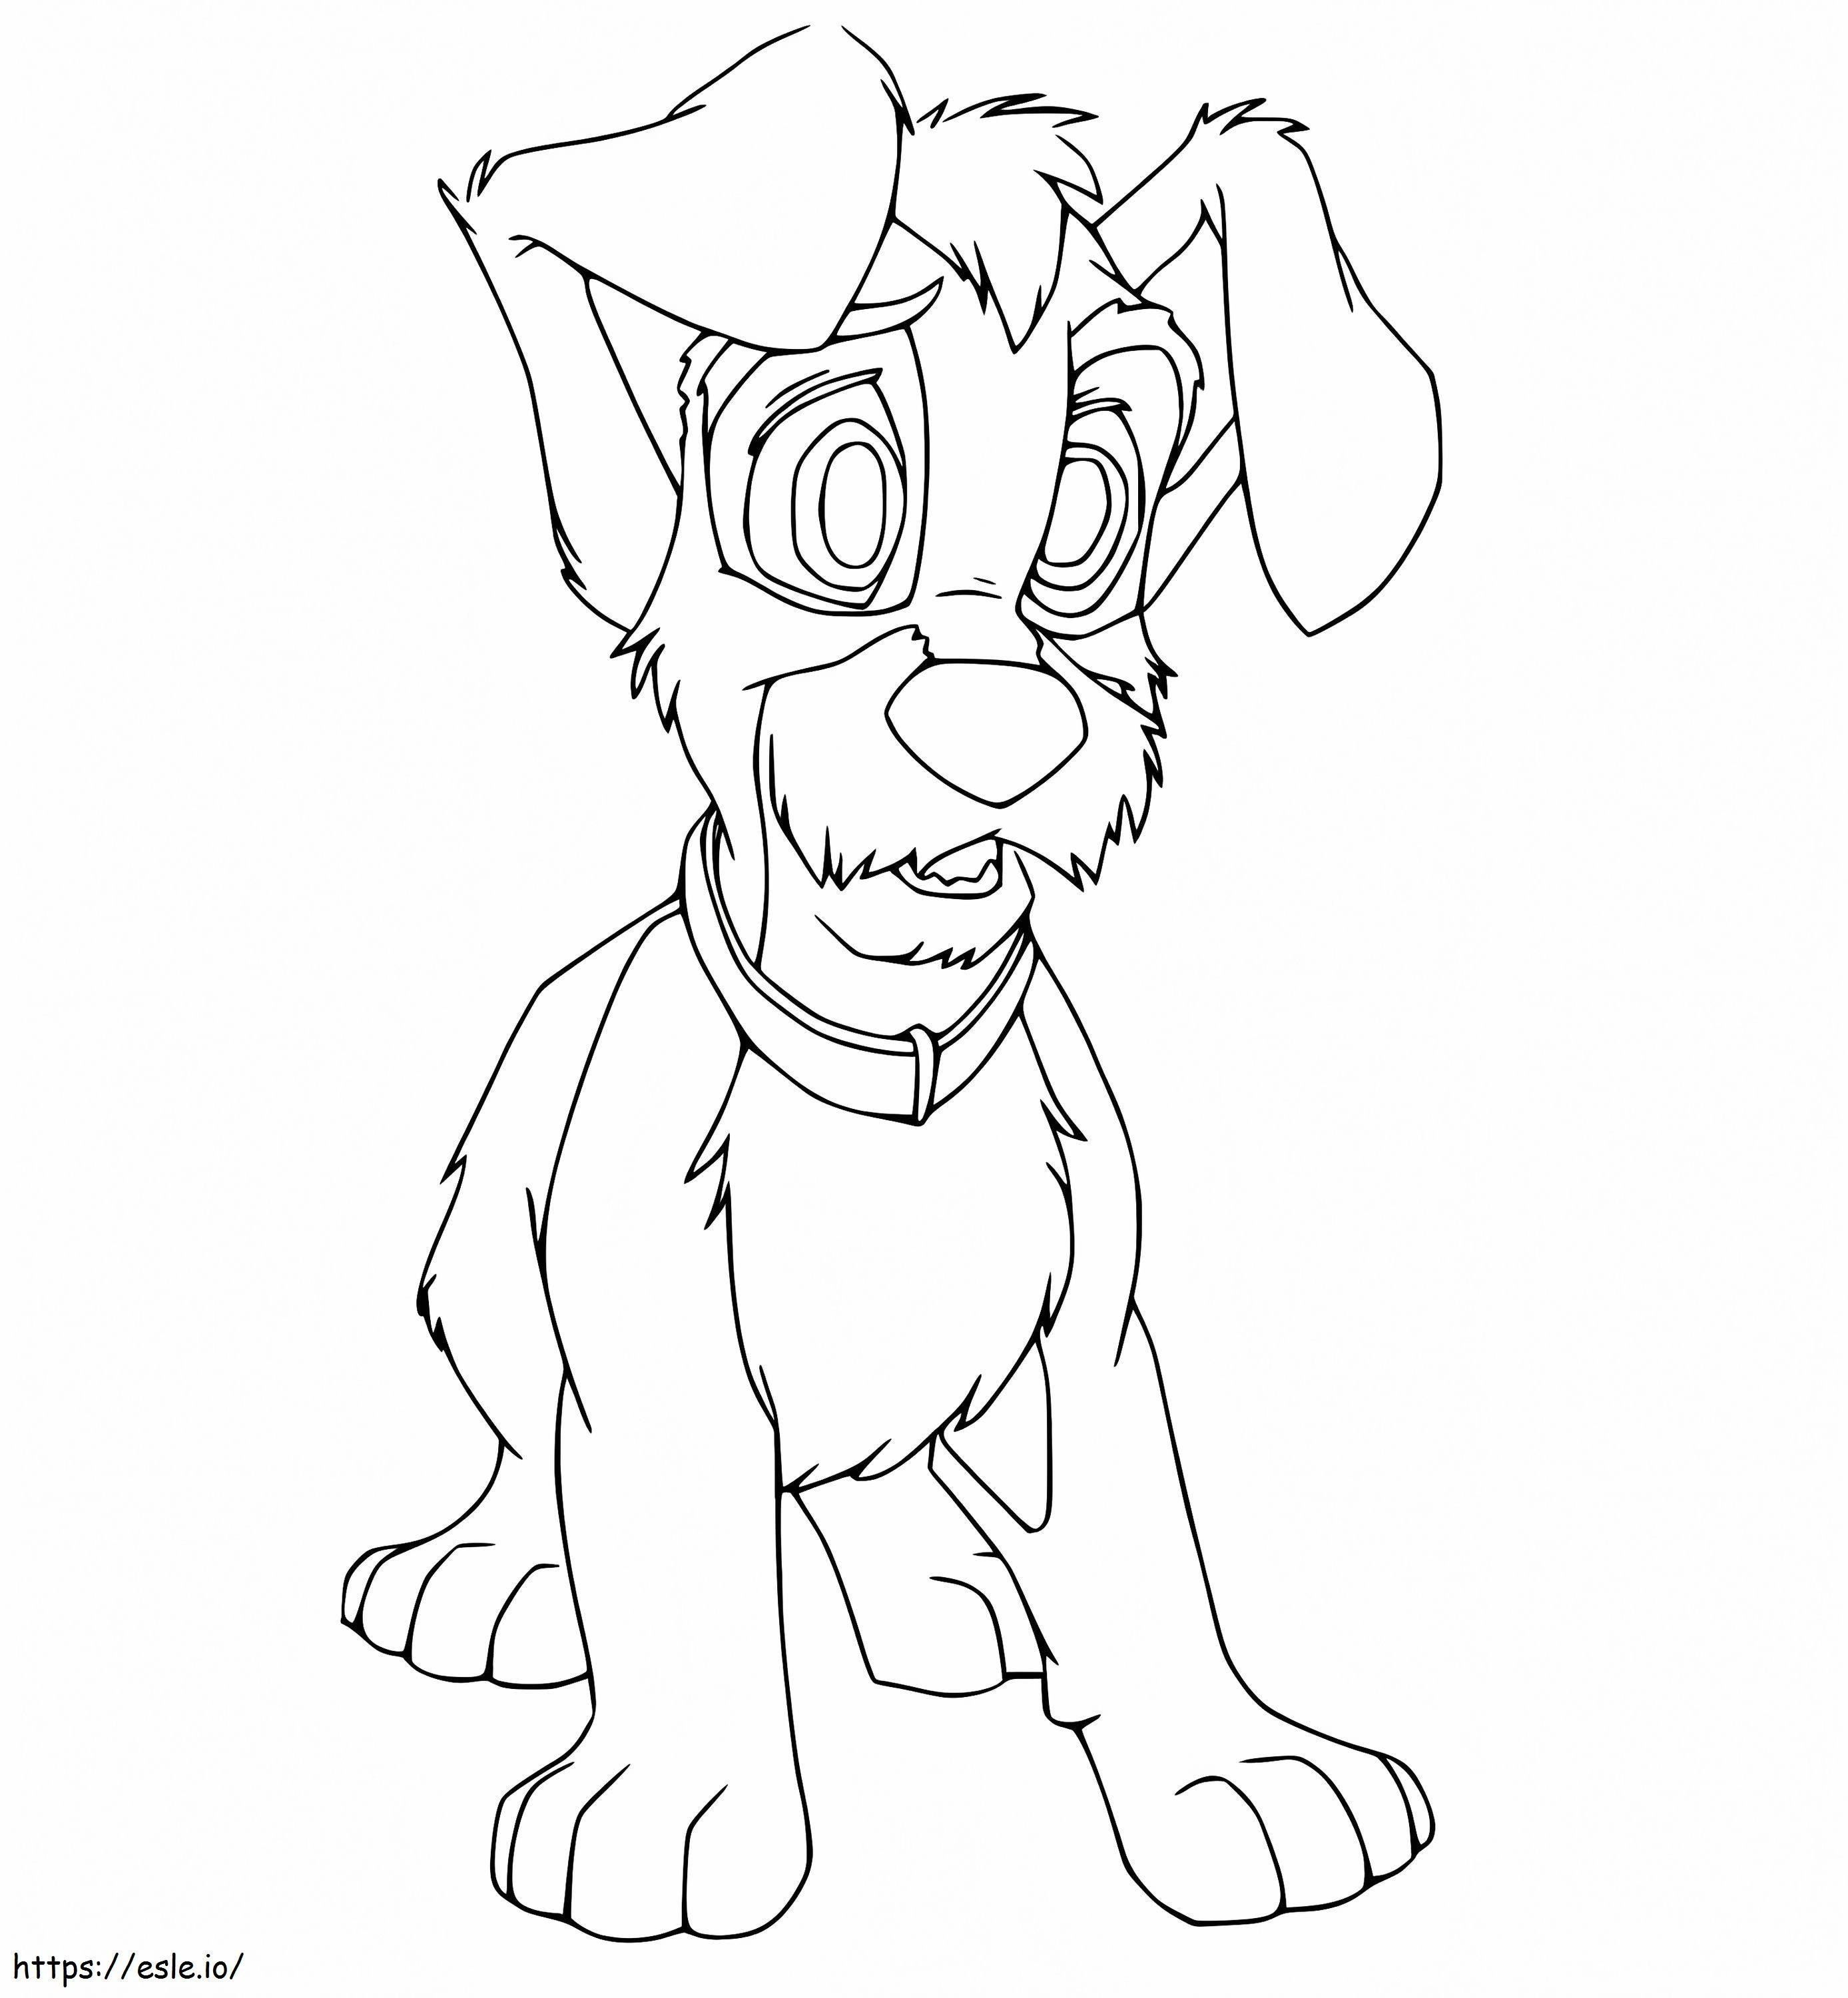 Scamp From Lady And The Tramp coloring page